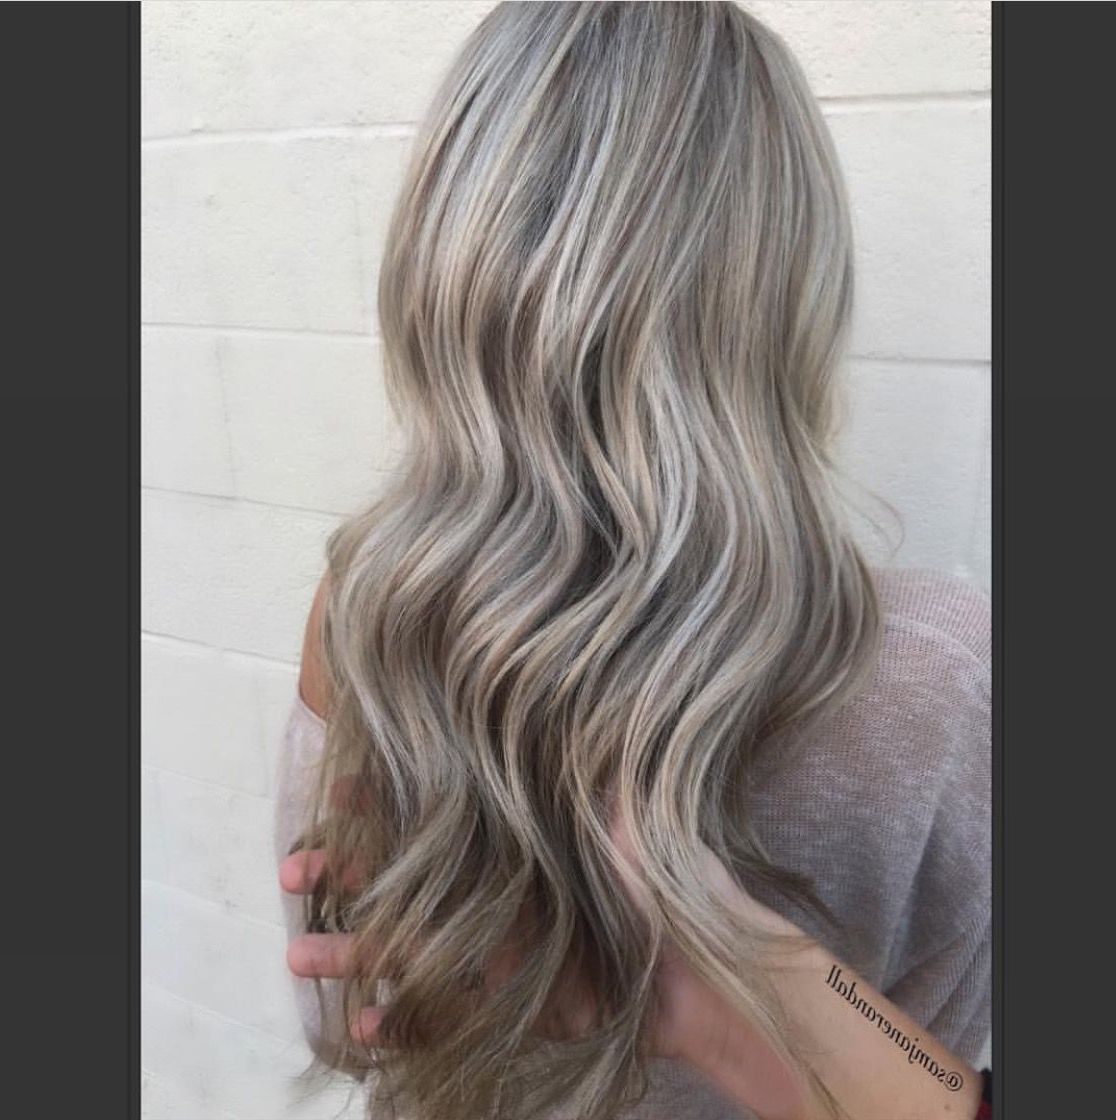 Dimensional Blonde (with Images) | Hair Beauty, Long Hair Within Layered Dimensional Hairstyles (View 16 of 20)